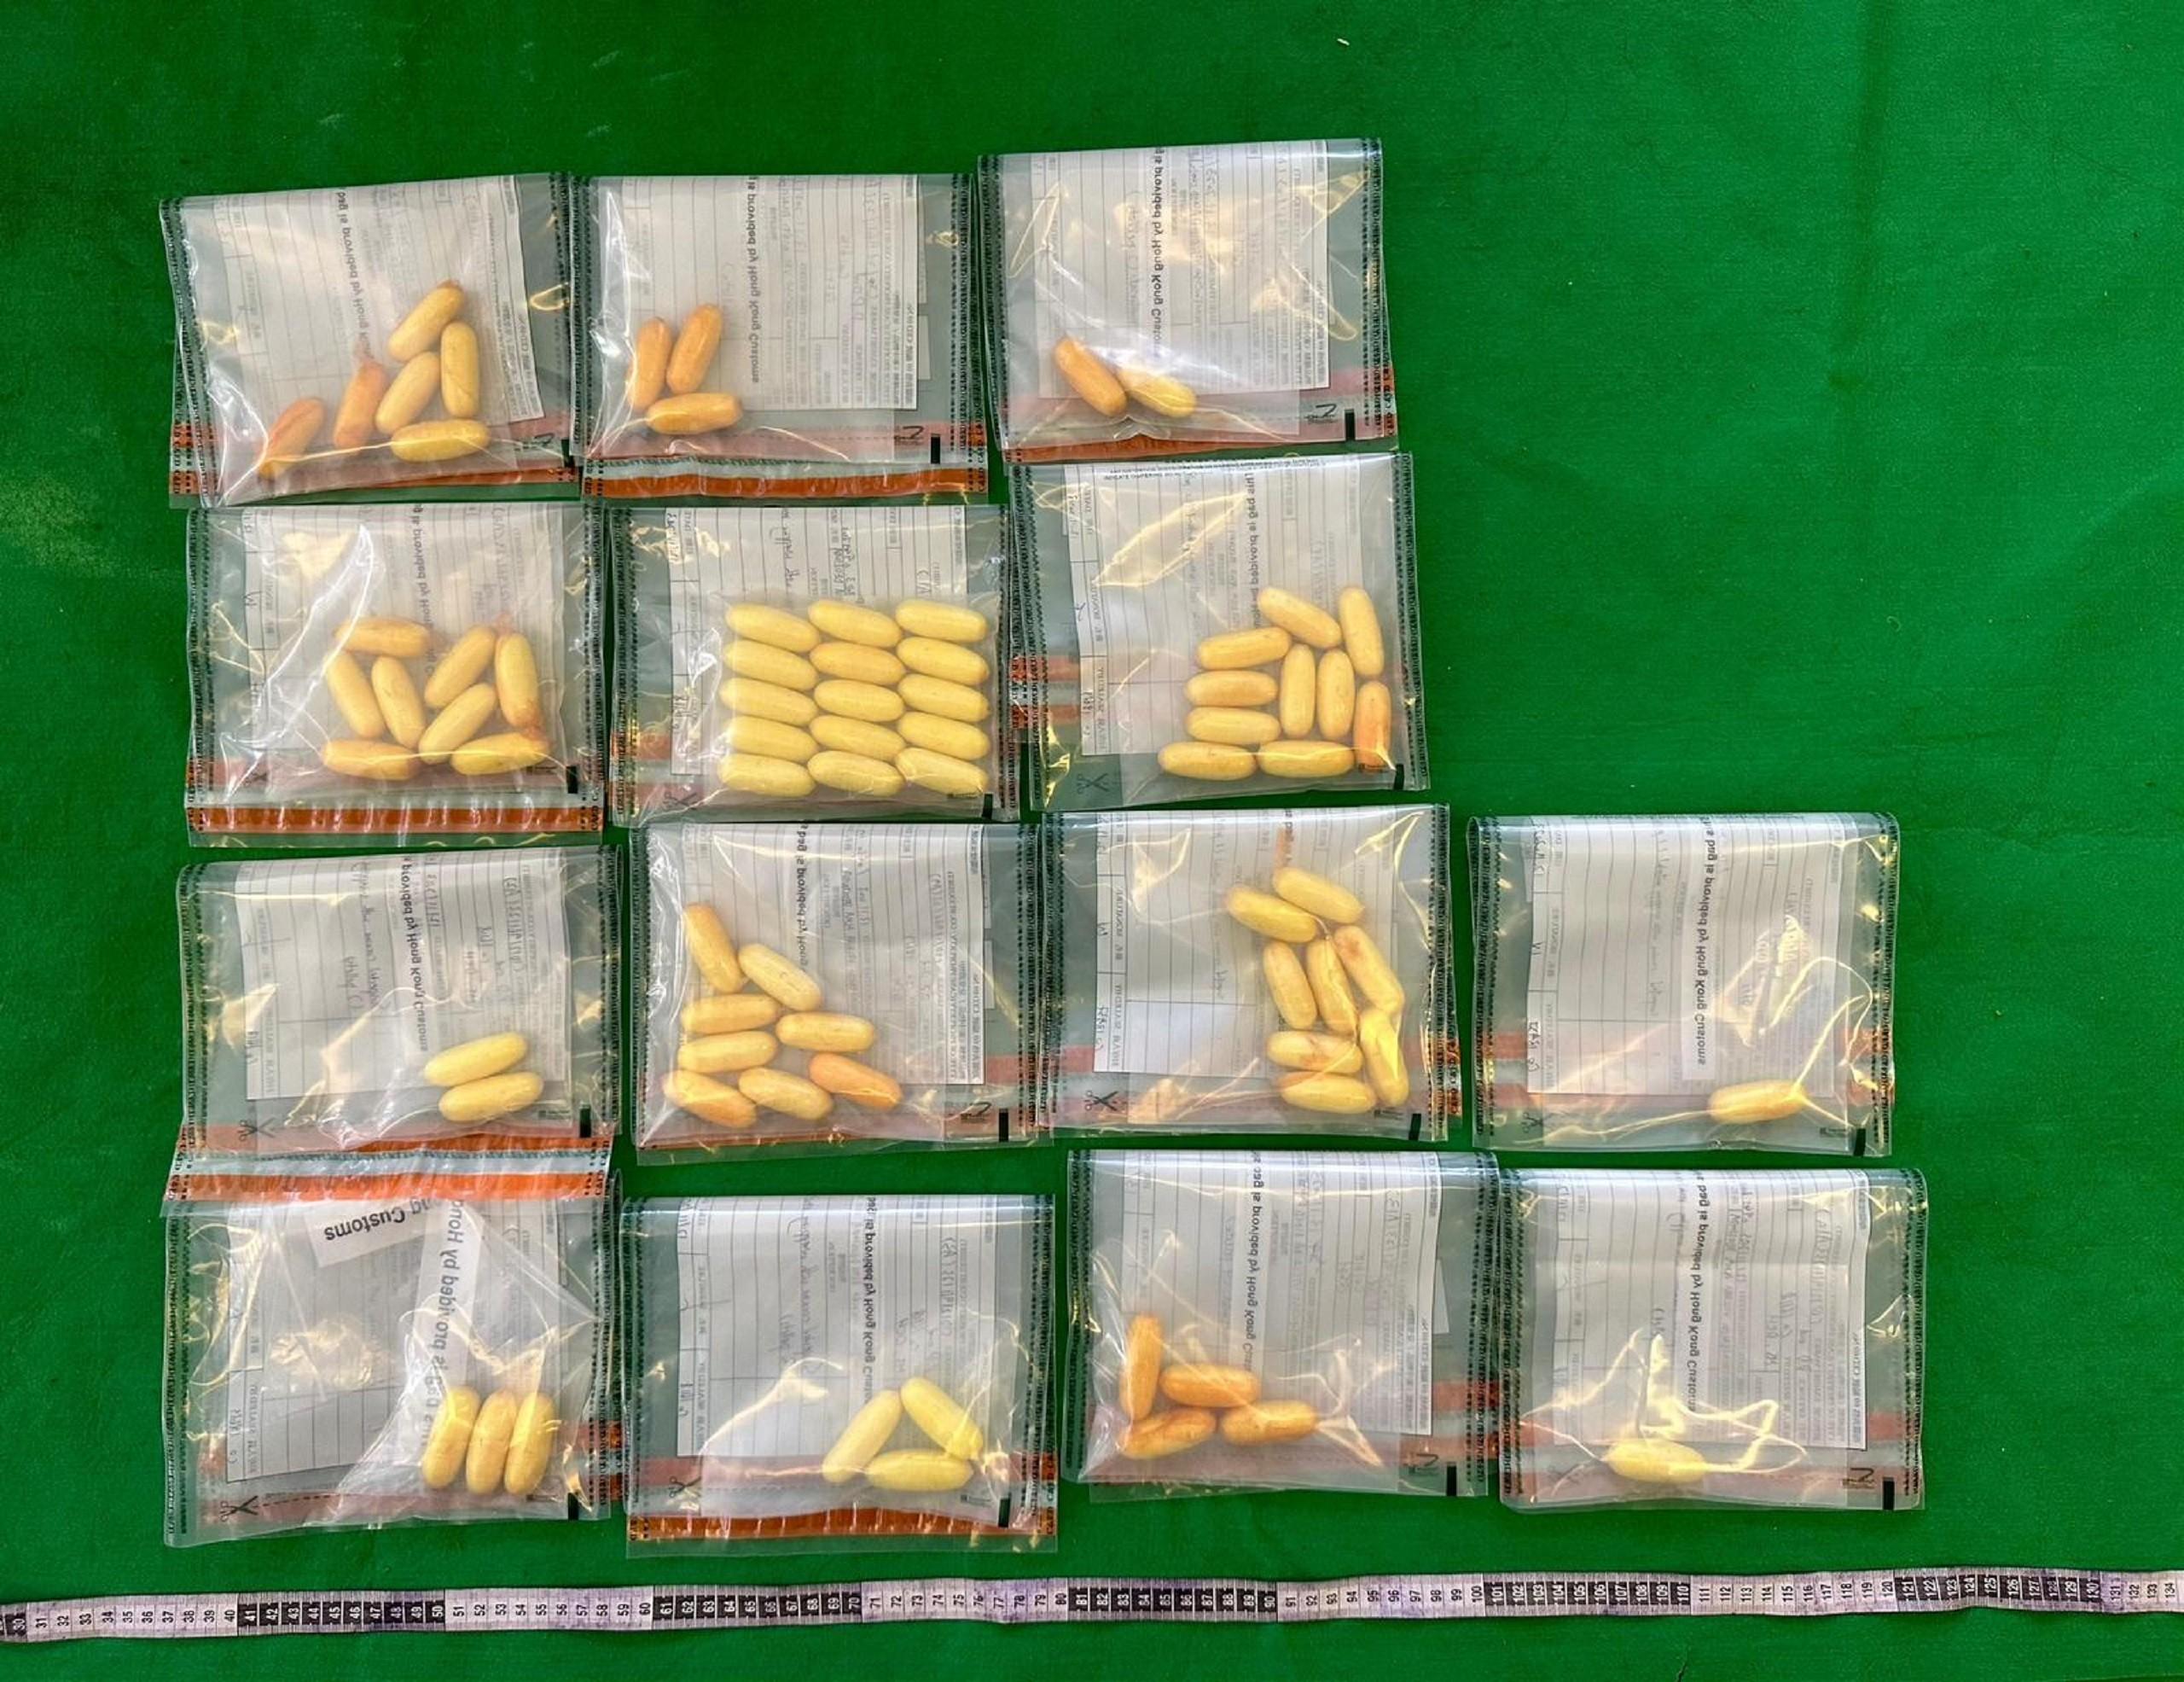 Hong Kong Customs on November 11 detected a dangerous drugs internal concealment case involving an incoming passenger at Hong Kong International Airport and seized about 890 grams of suspected cocaine with an estimated market value of about $1.1 million. Photo shows the suspected cocaine seized. 